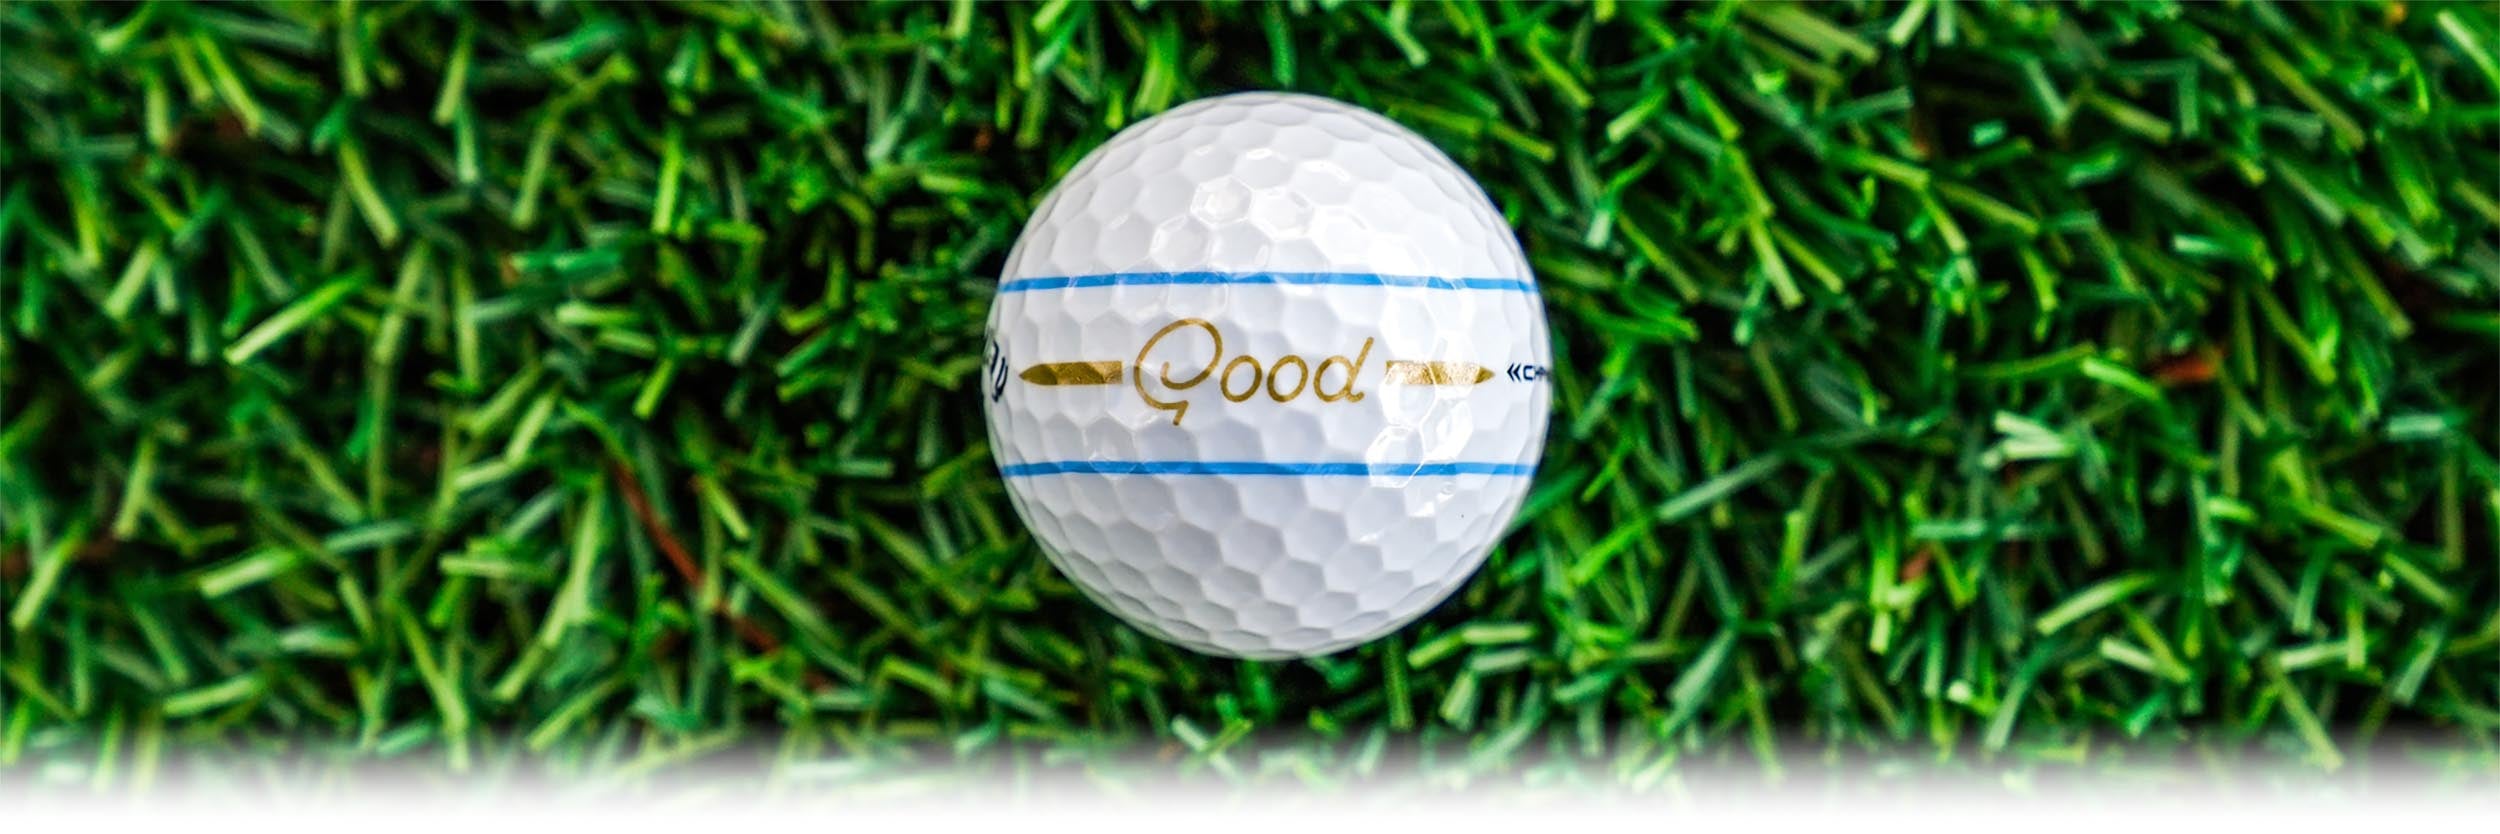 Play Look and Good Golf Performance Best to Good Your Wear |